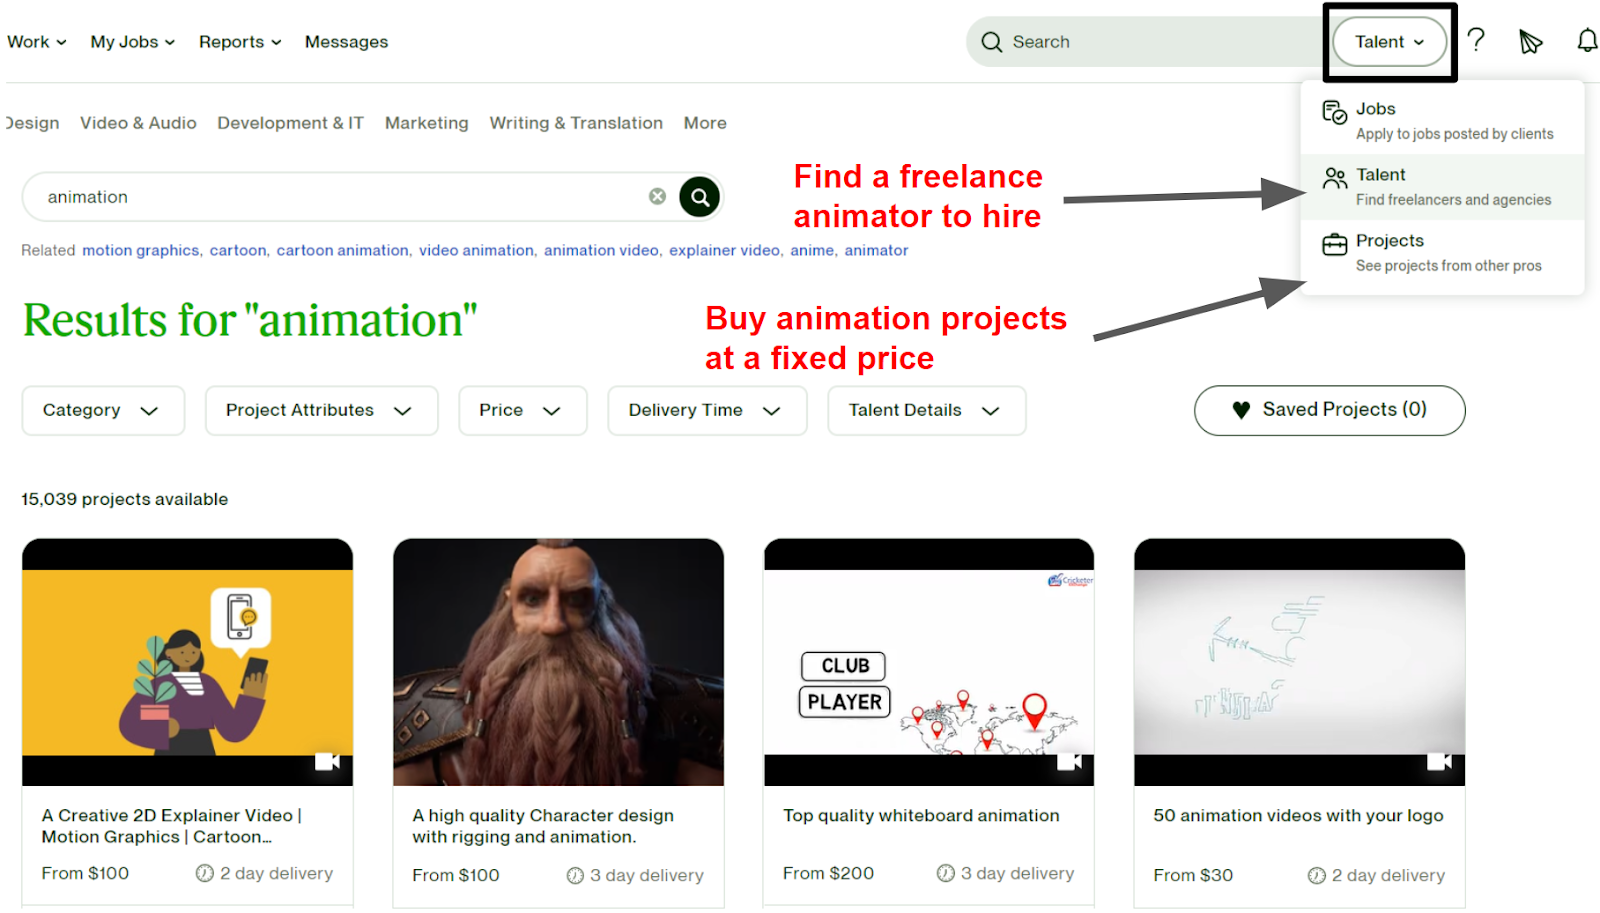 browsing for freelance animators and projects on Upwork